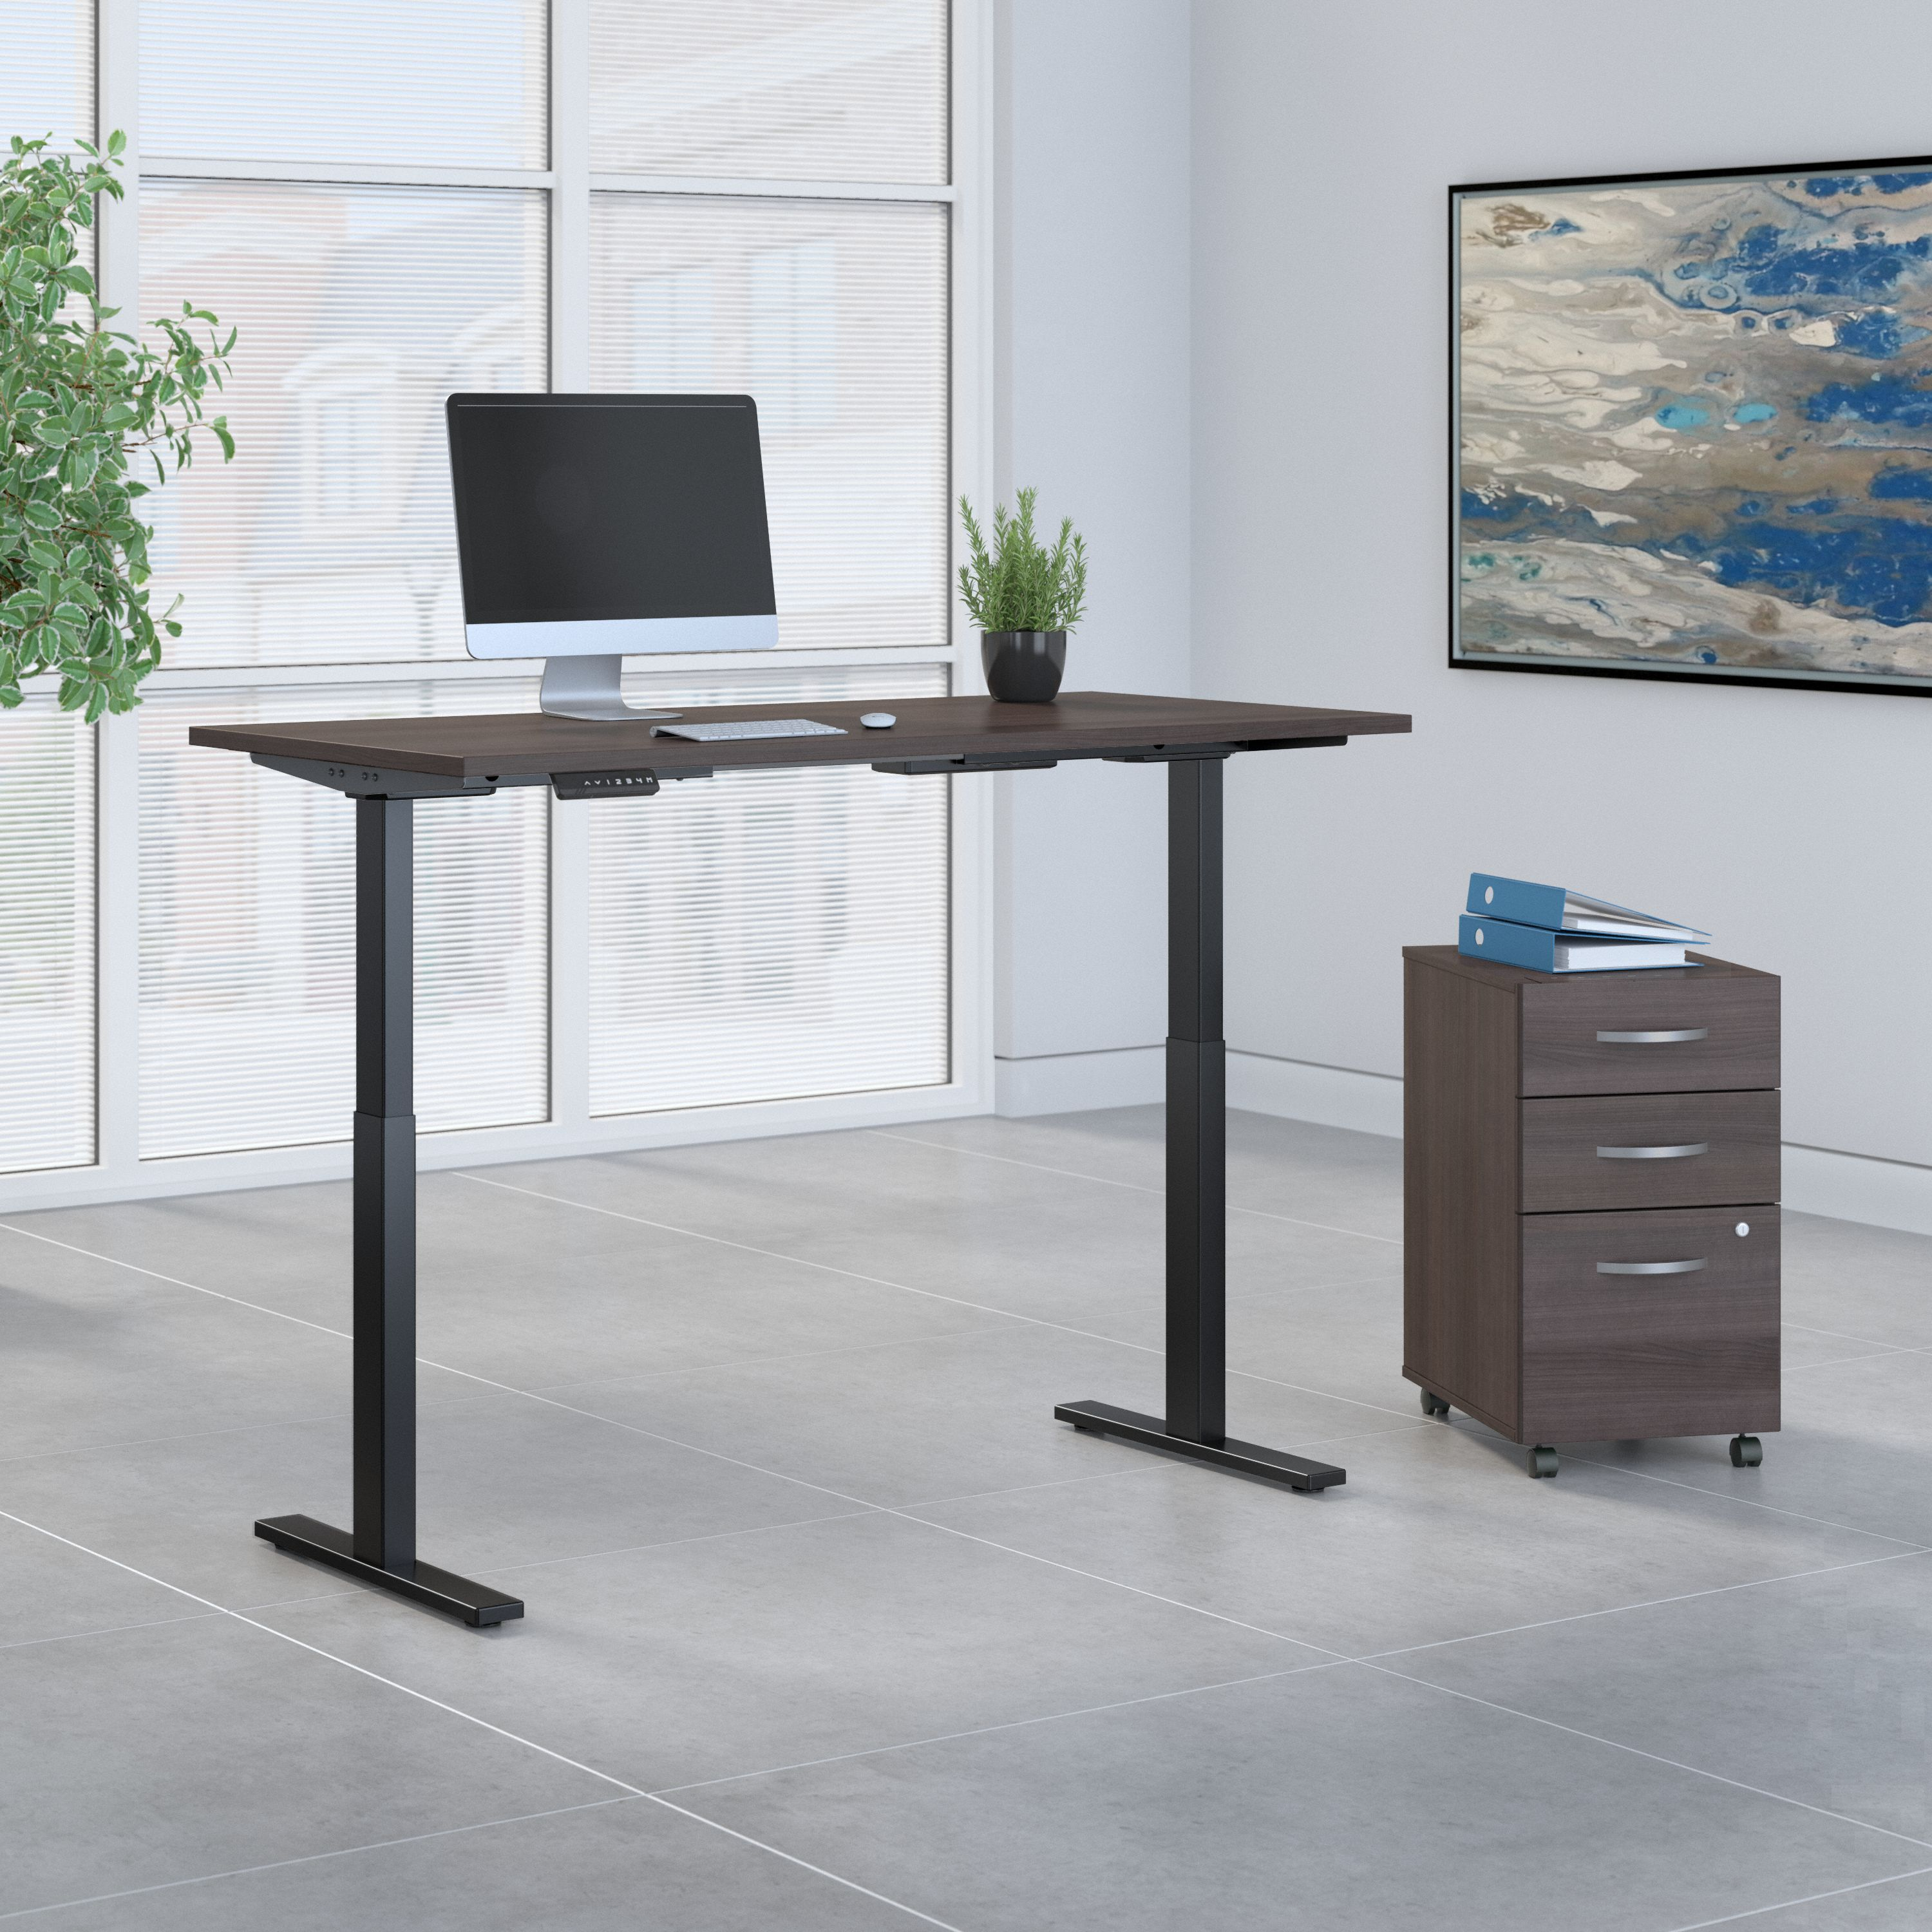 Shop Move 60 Series by Bush Business Furniture 72W x 30D Height Adjustable Standing Desk with Storage 01 M6S006SGSU #color_storm gray/black powder coat